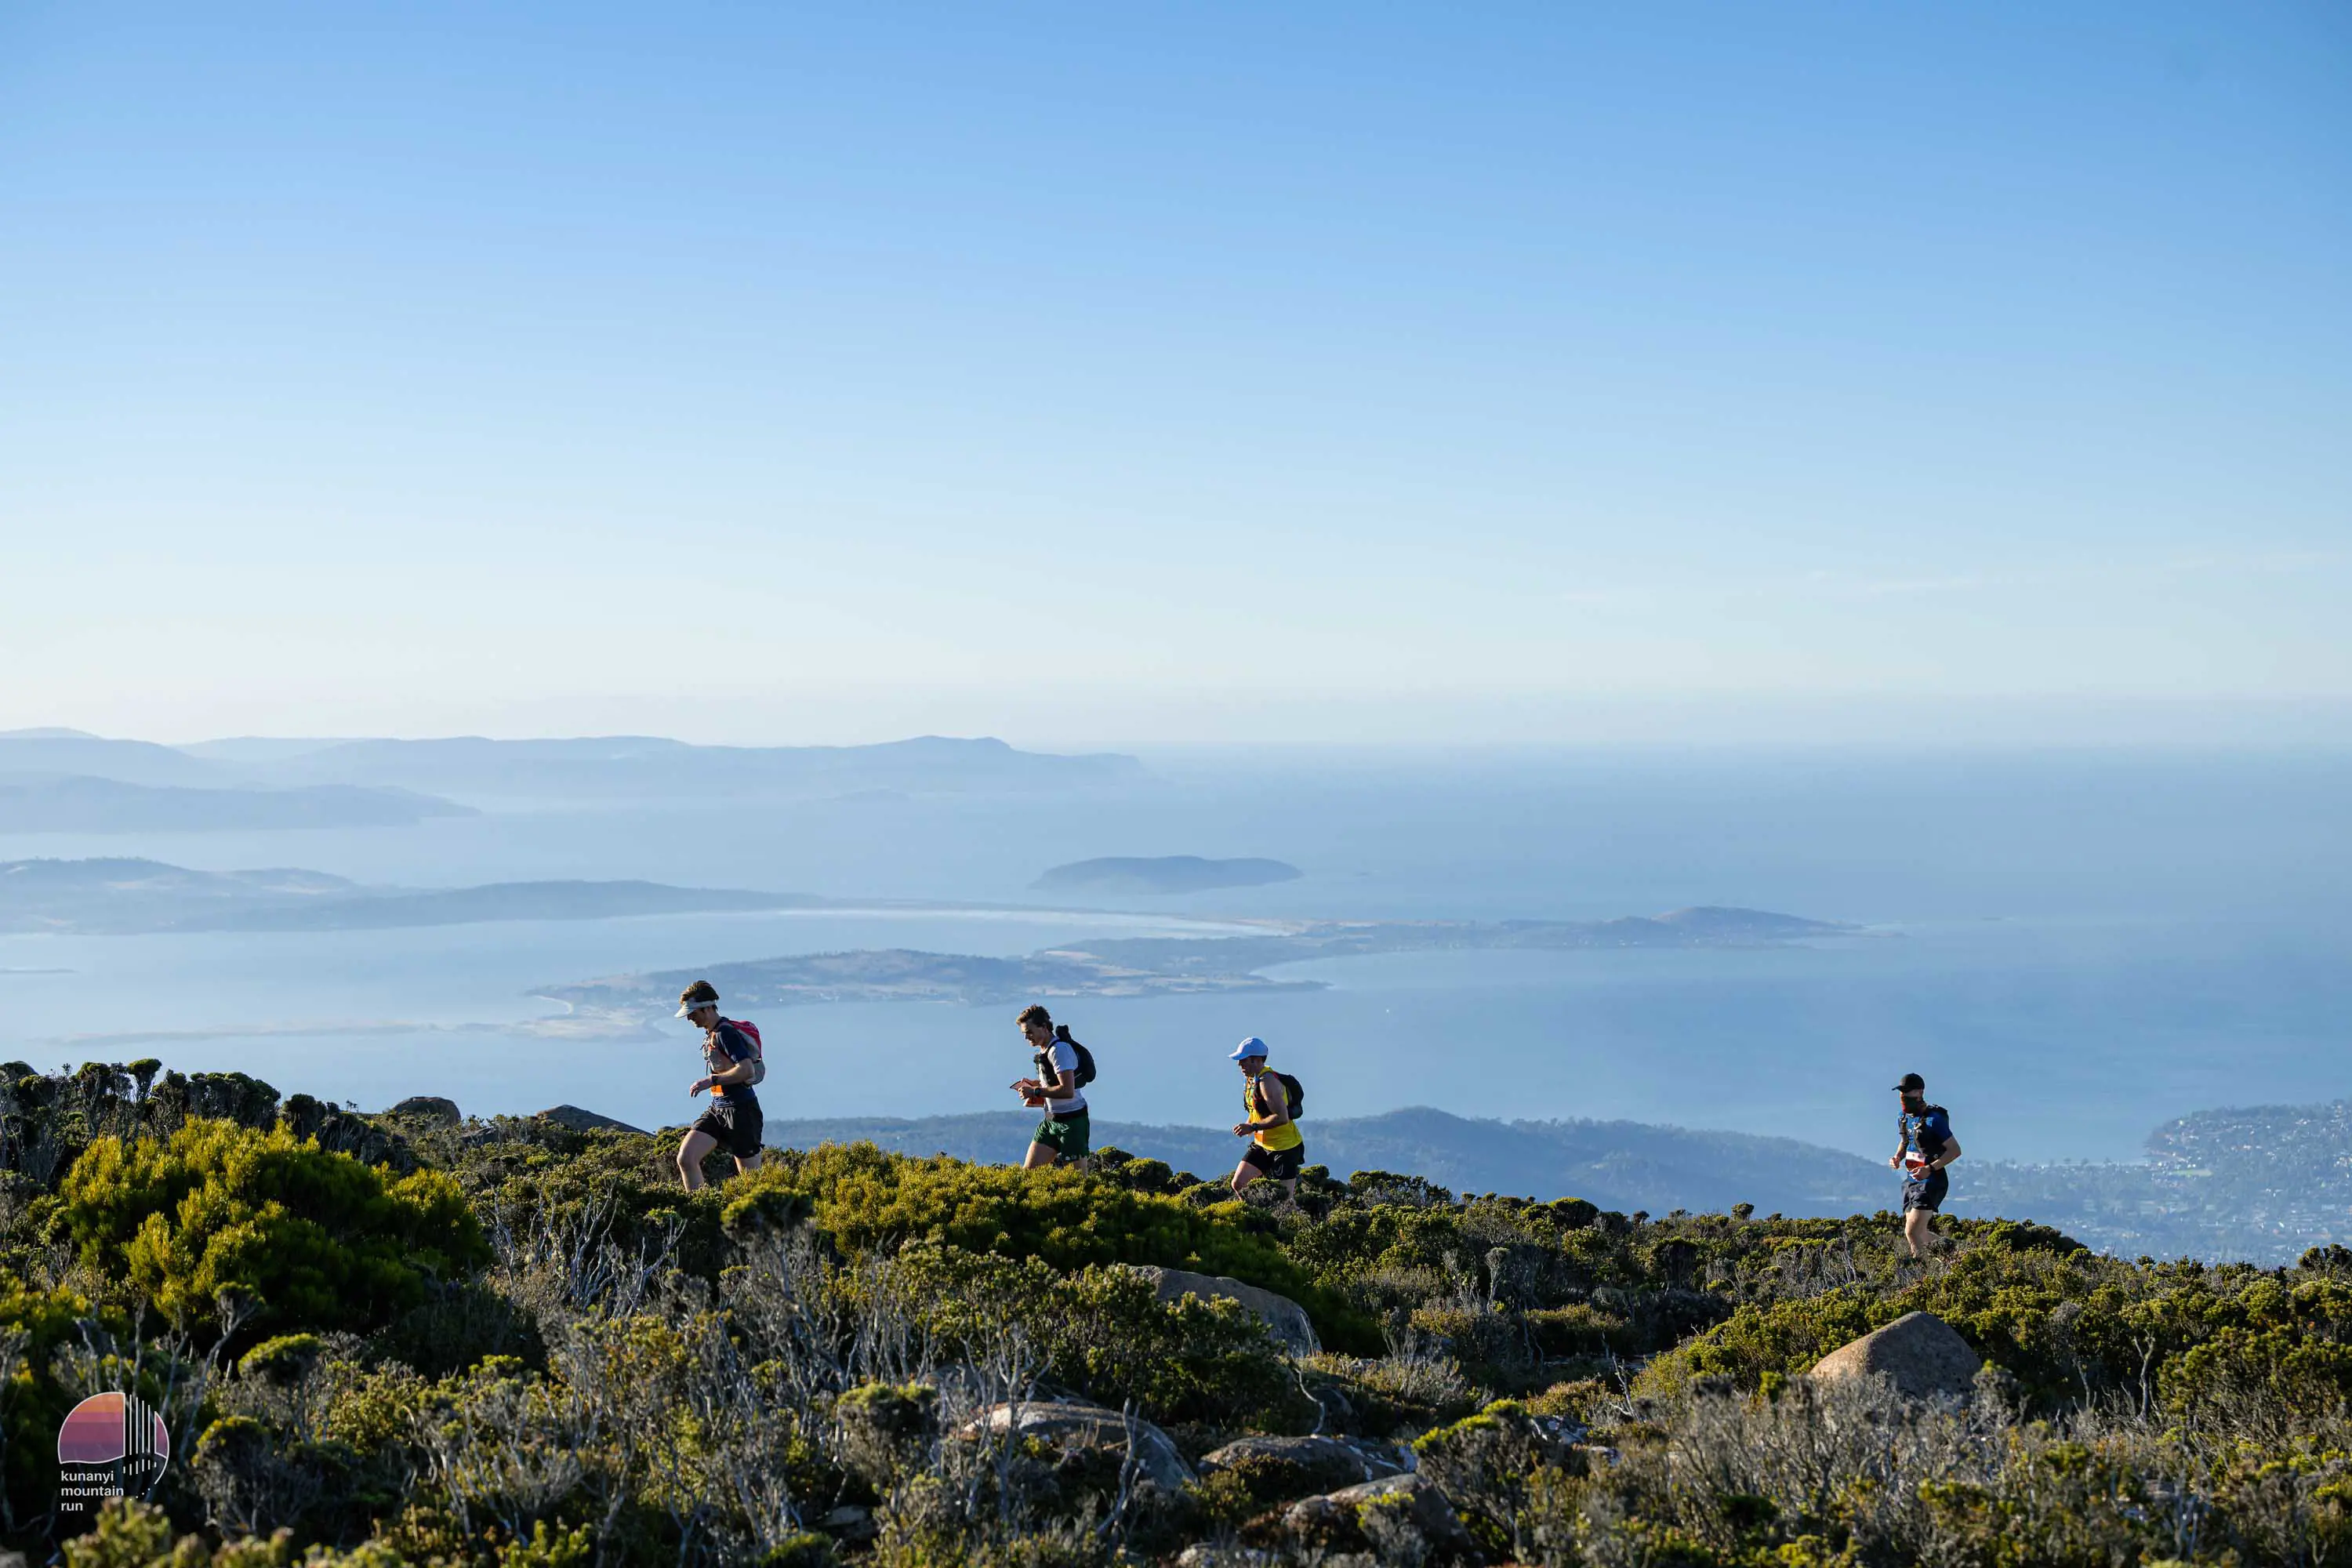 A group of four runners in hats, trail running vests and athletic gear run along an elevated ridge of low scrub with views of a cloud covered valley stretching into the distance.